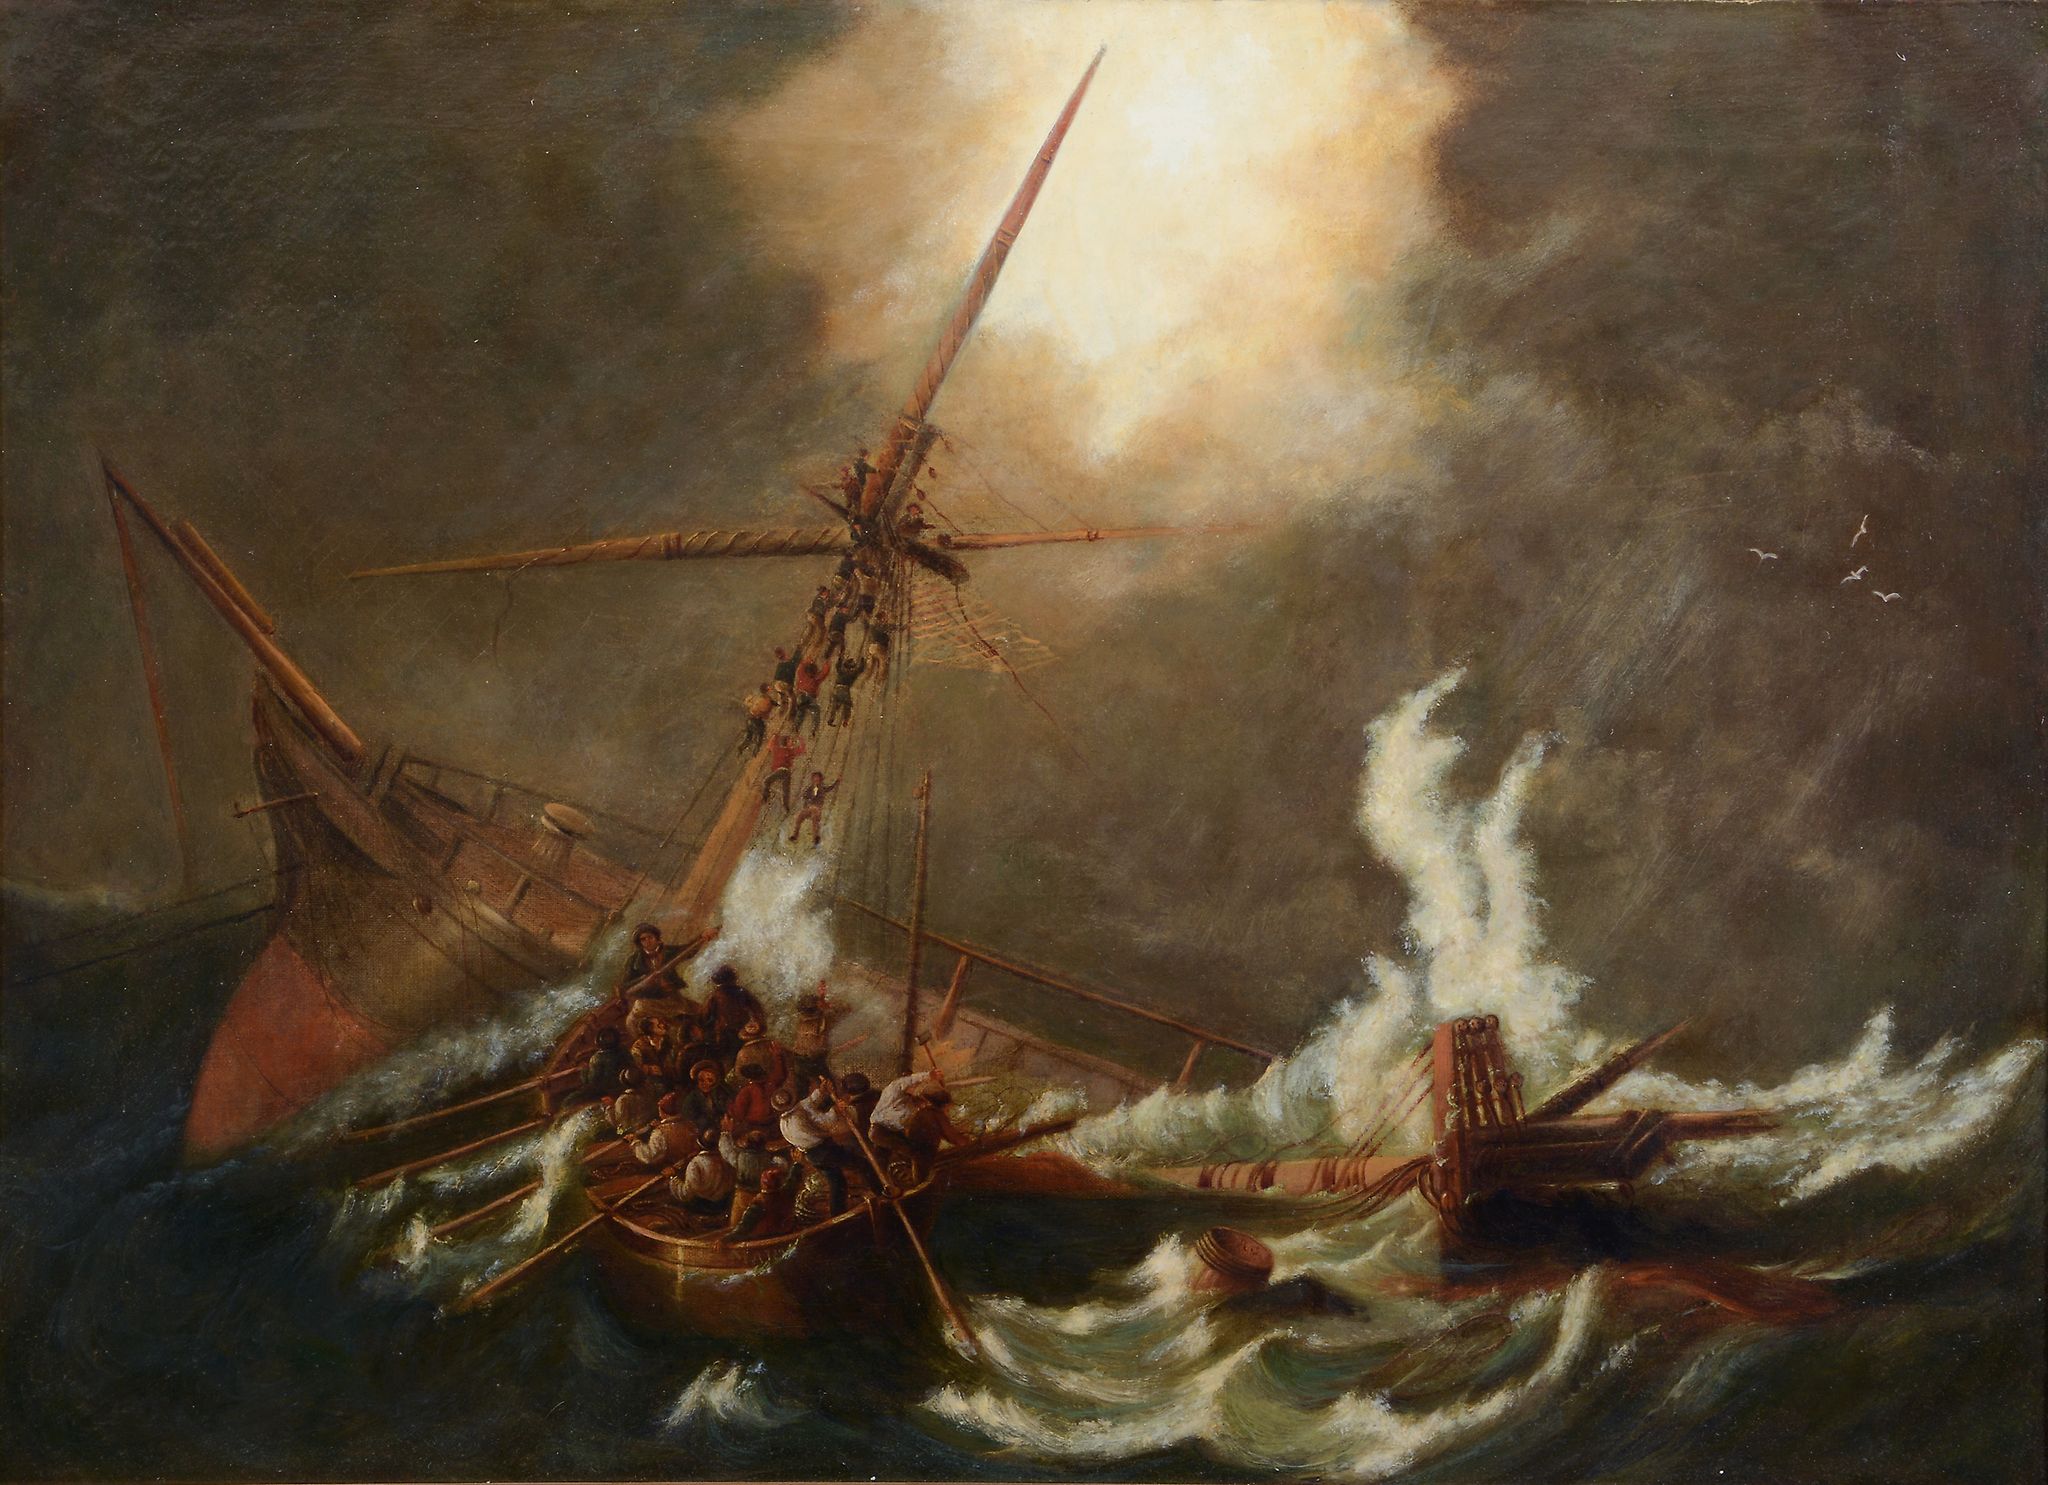 English School (19th century) - The wreck Oil on canvas 54 x 73 cm (21 1/4 x 28 3/4 in)